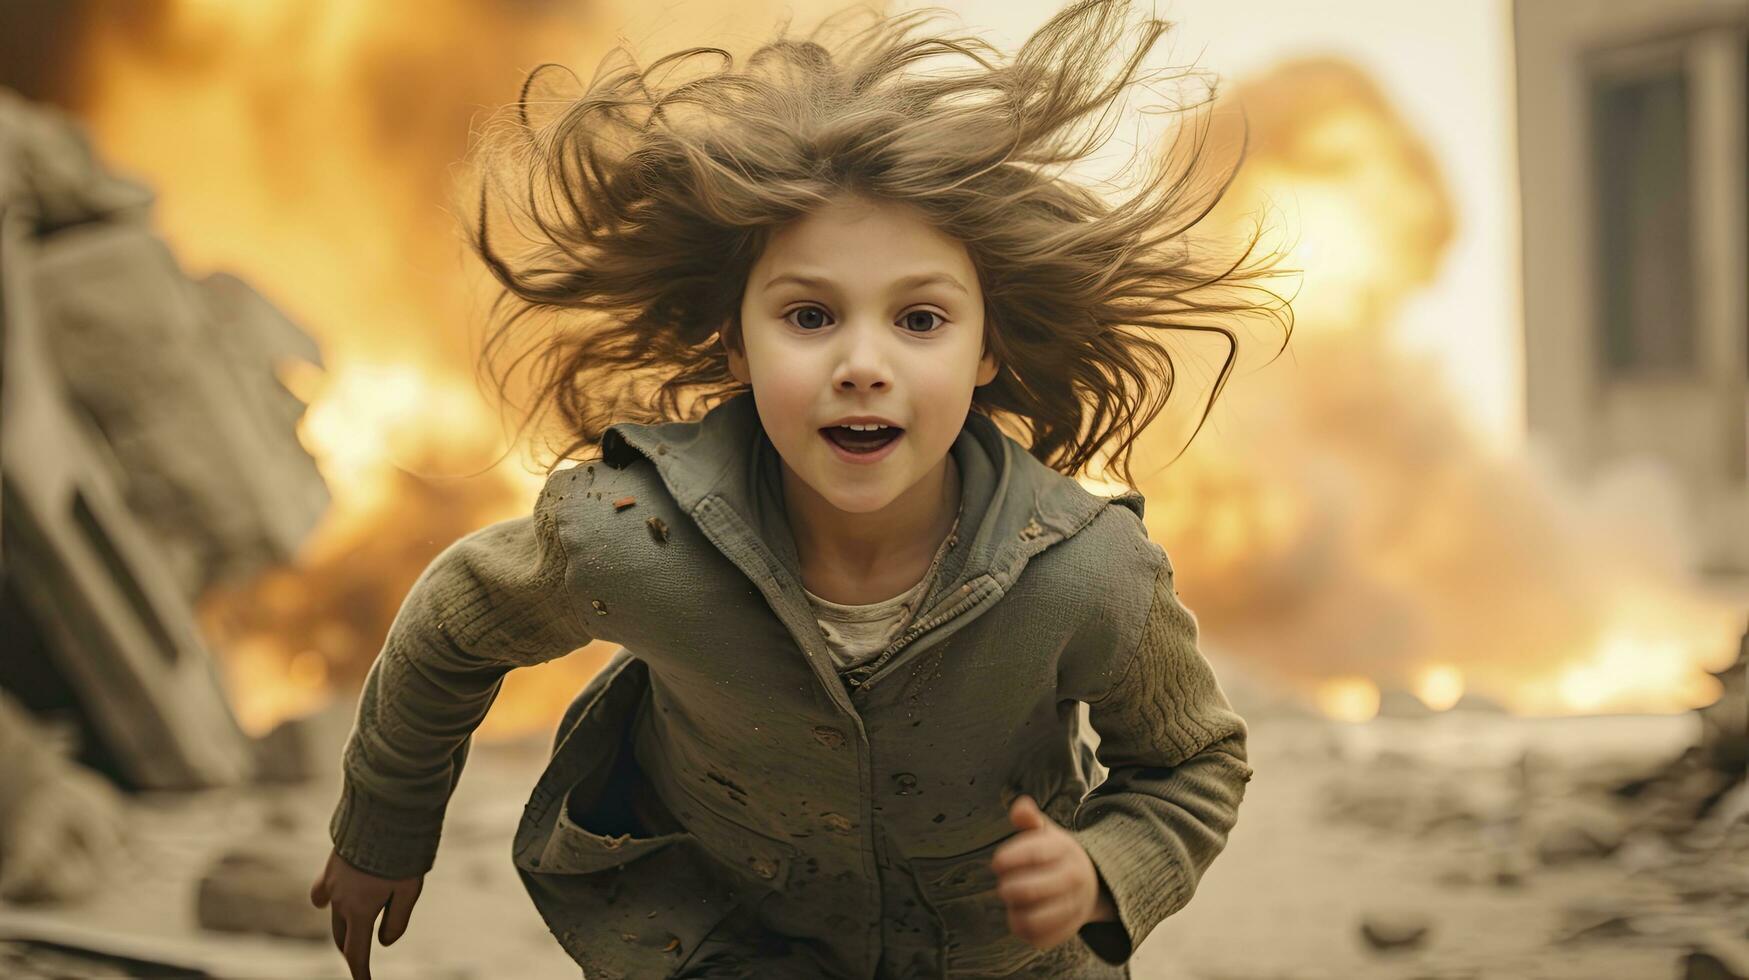 AI generated A little scared Muslim girl runs away from the explosion during the war photo